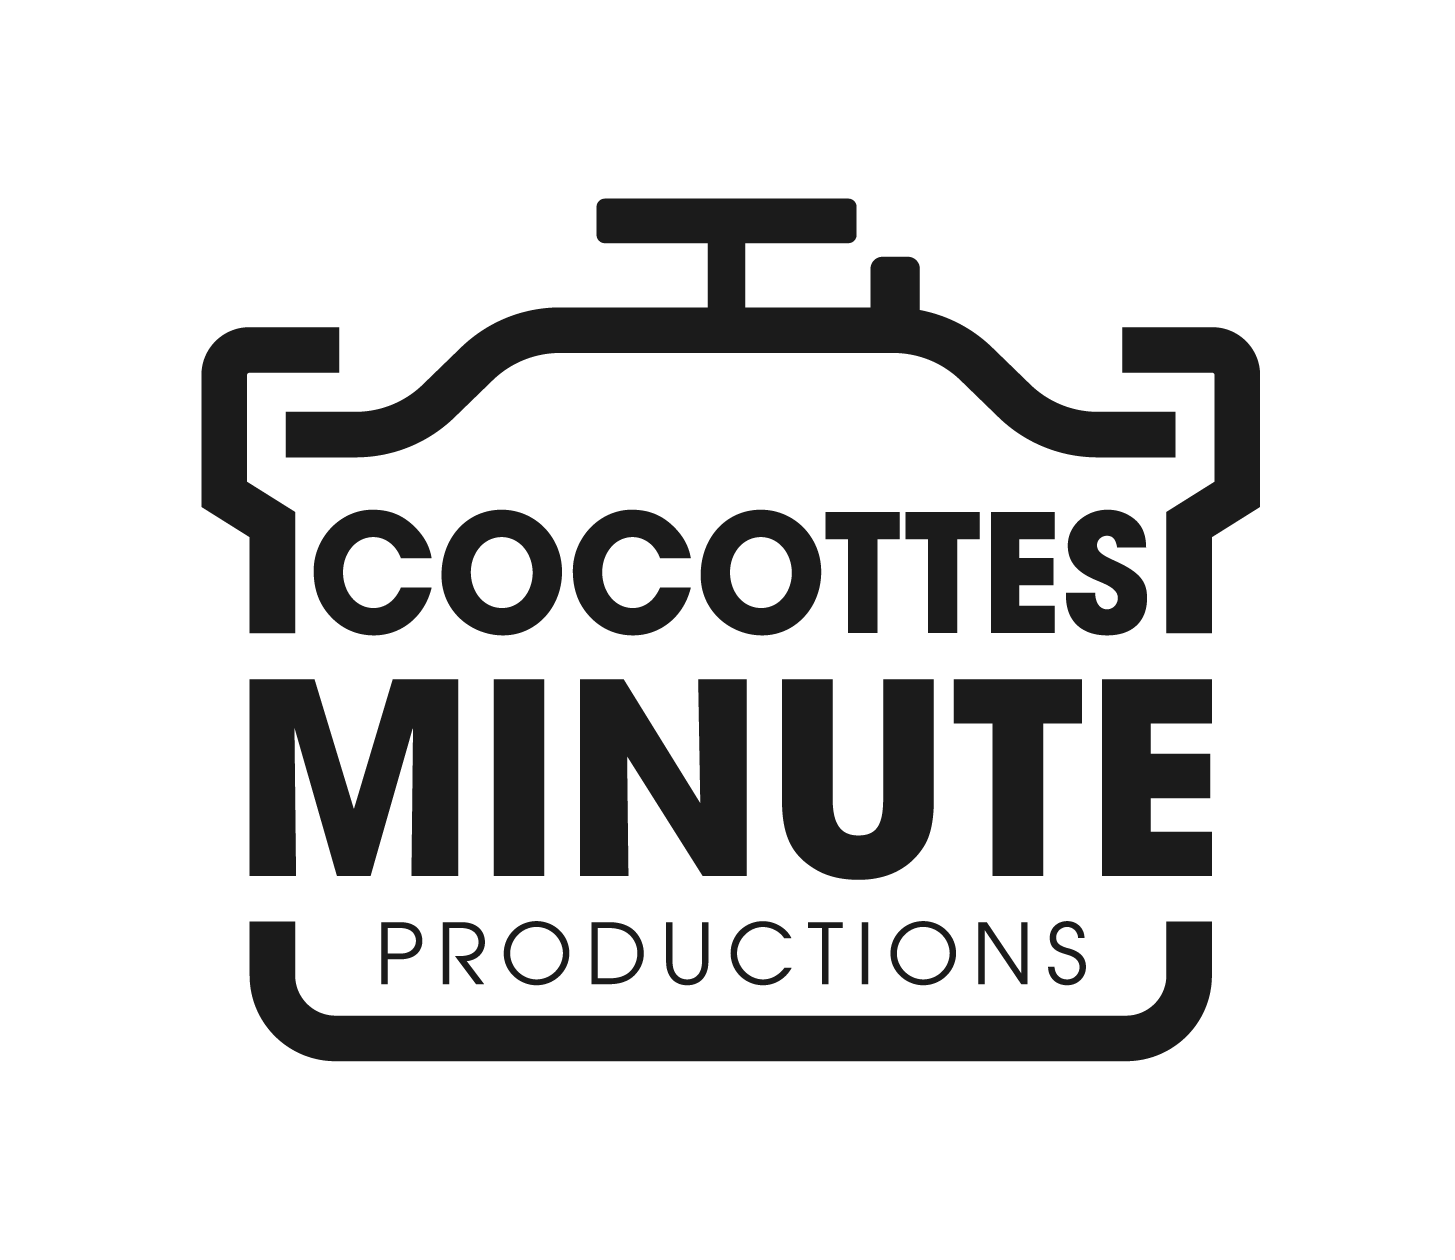 cocottesminute productions